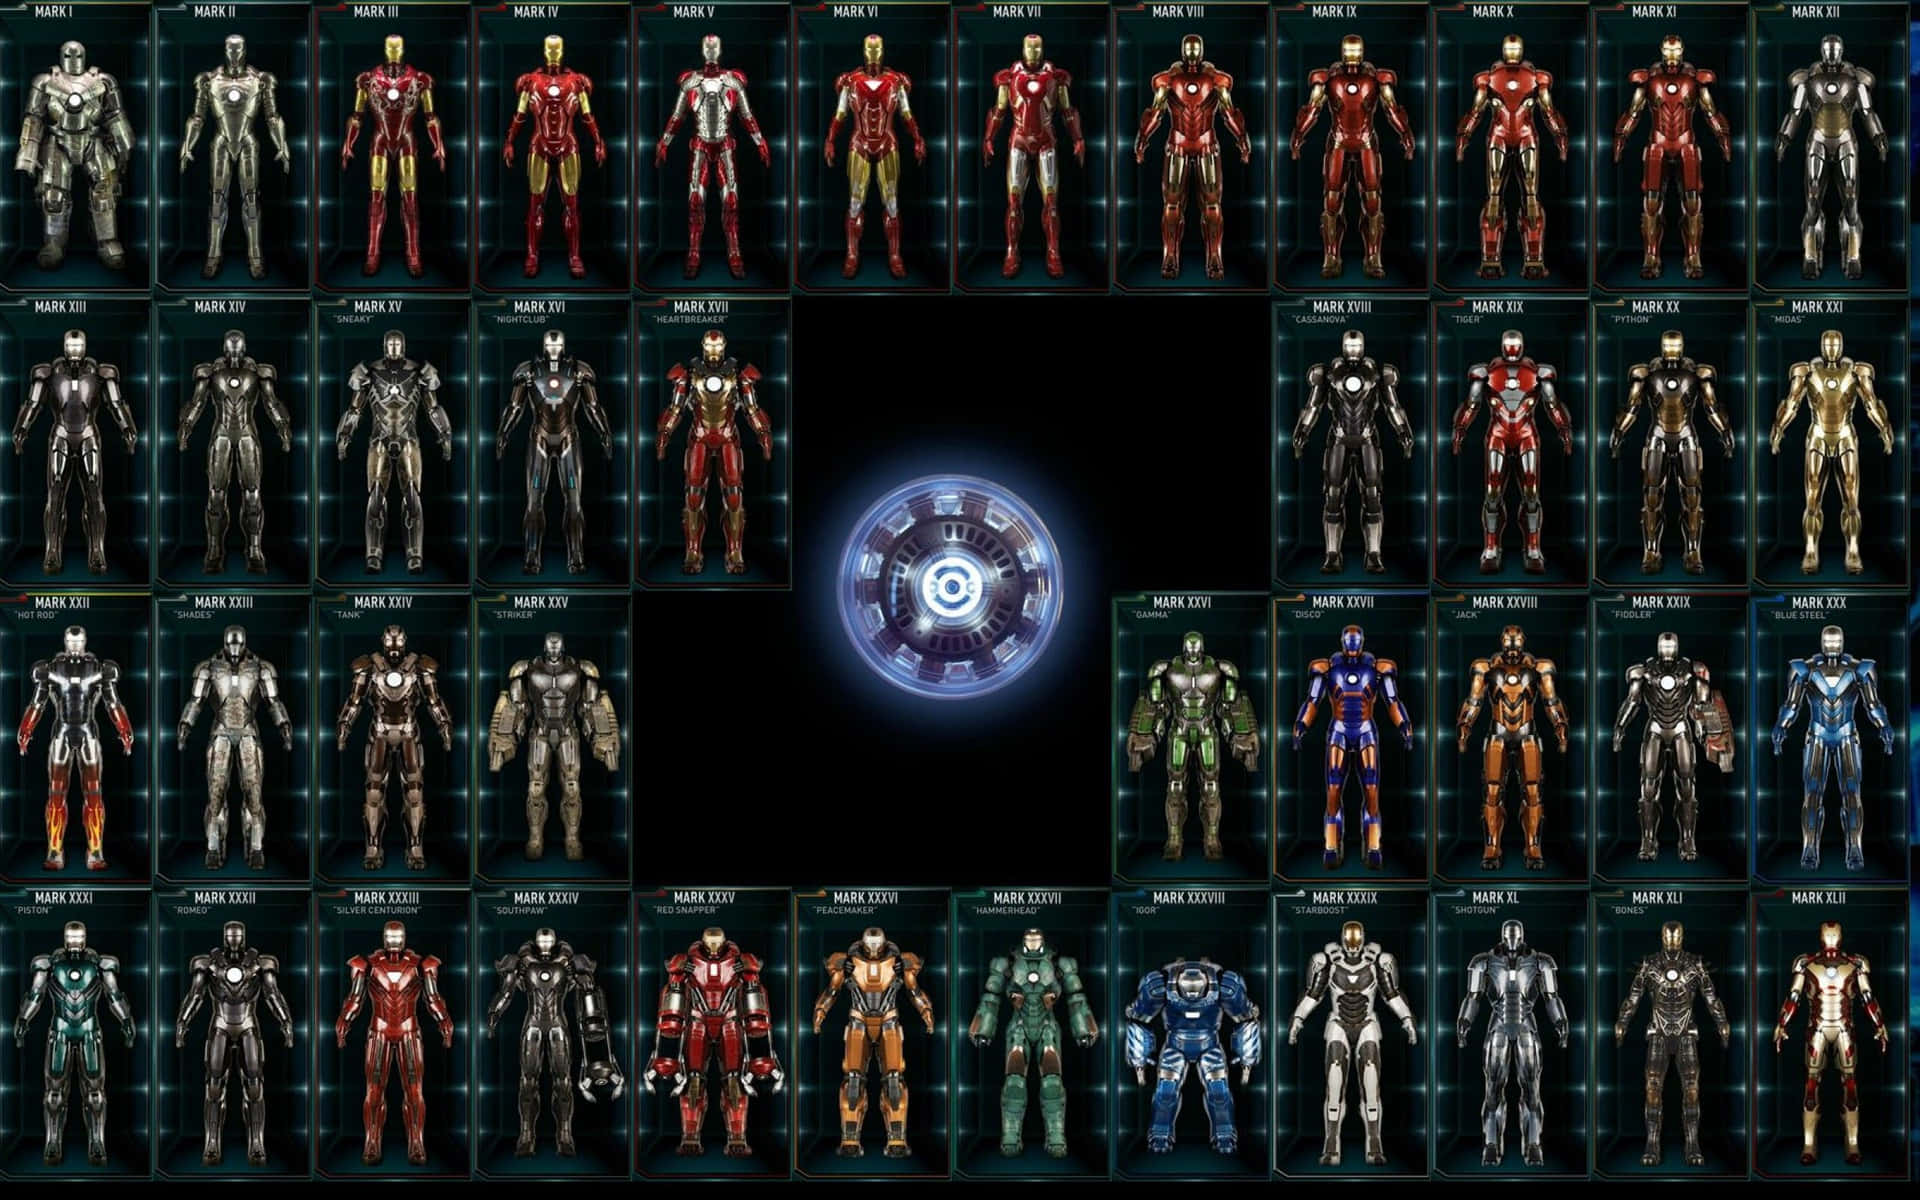 “A Look Into the Technology Behind Iron Man’s Suit” Wallpaper